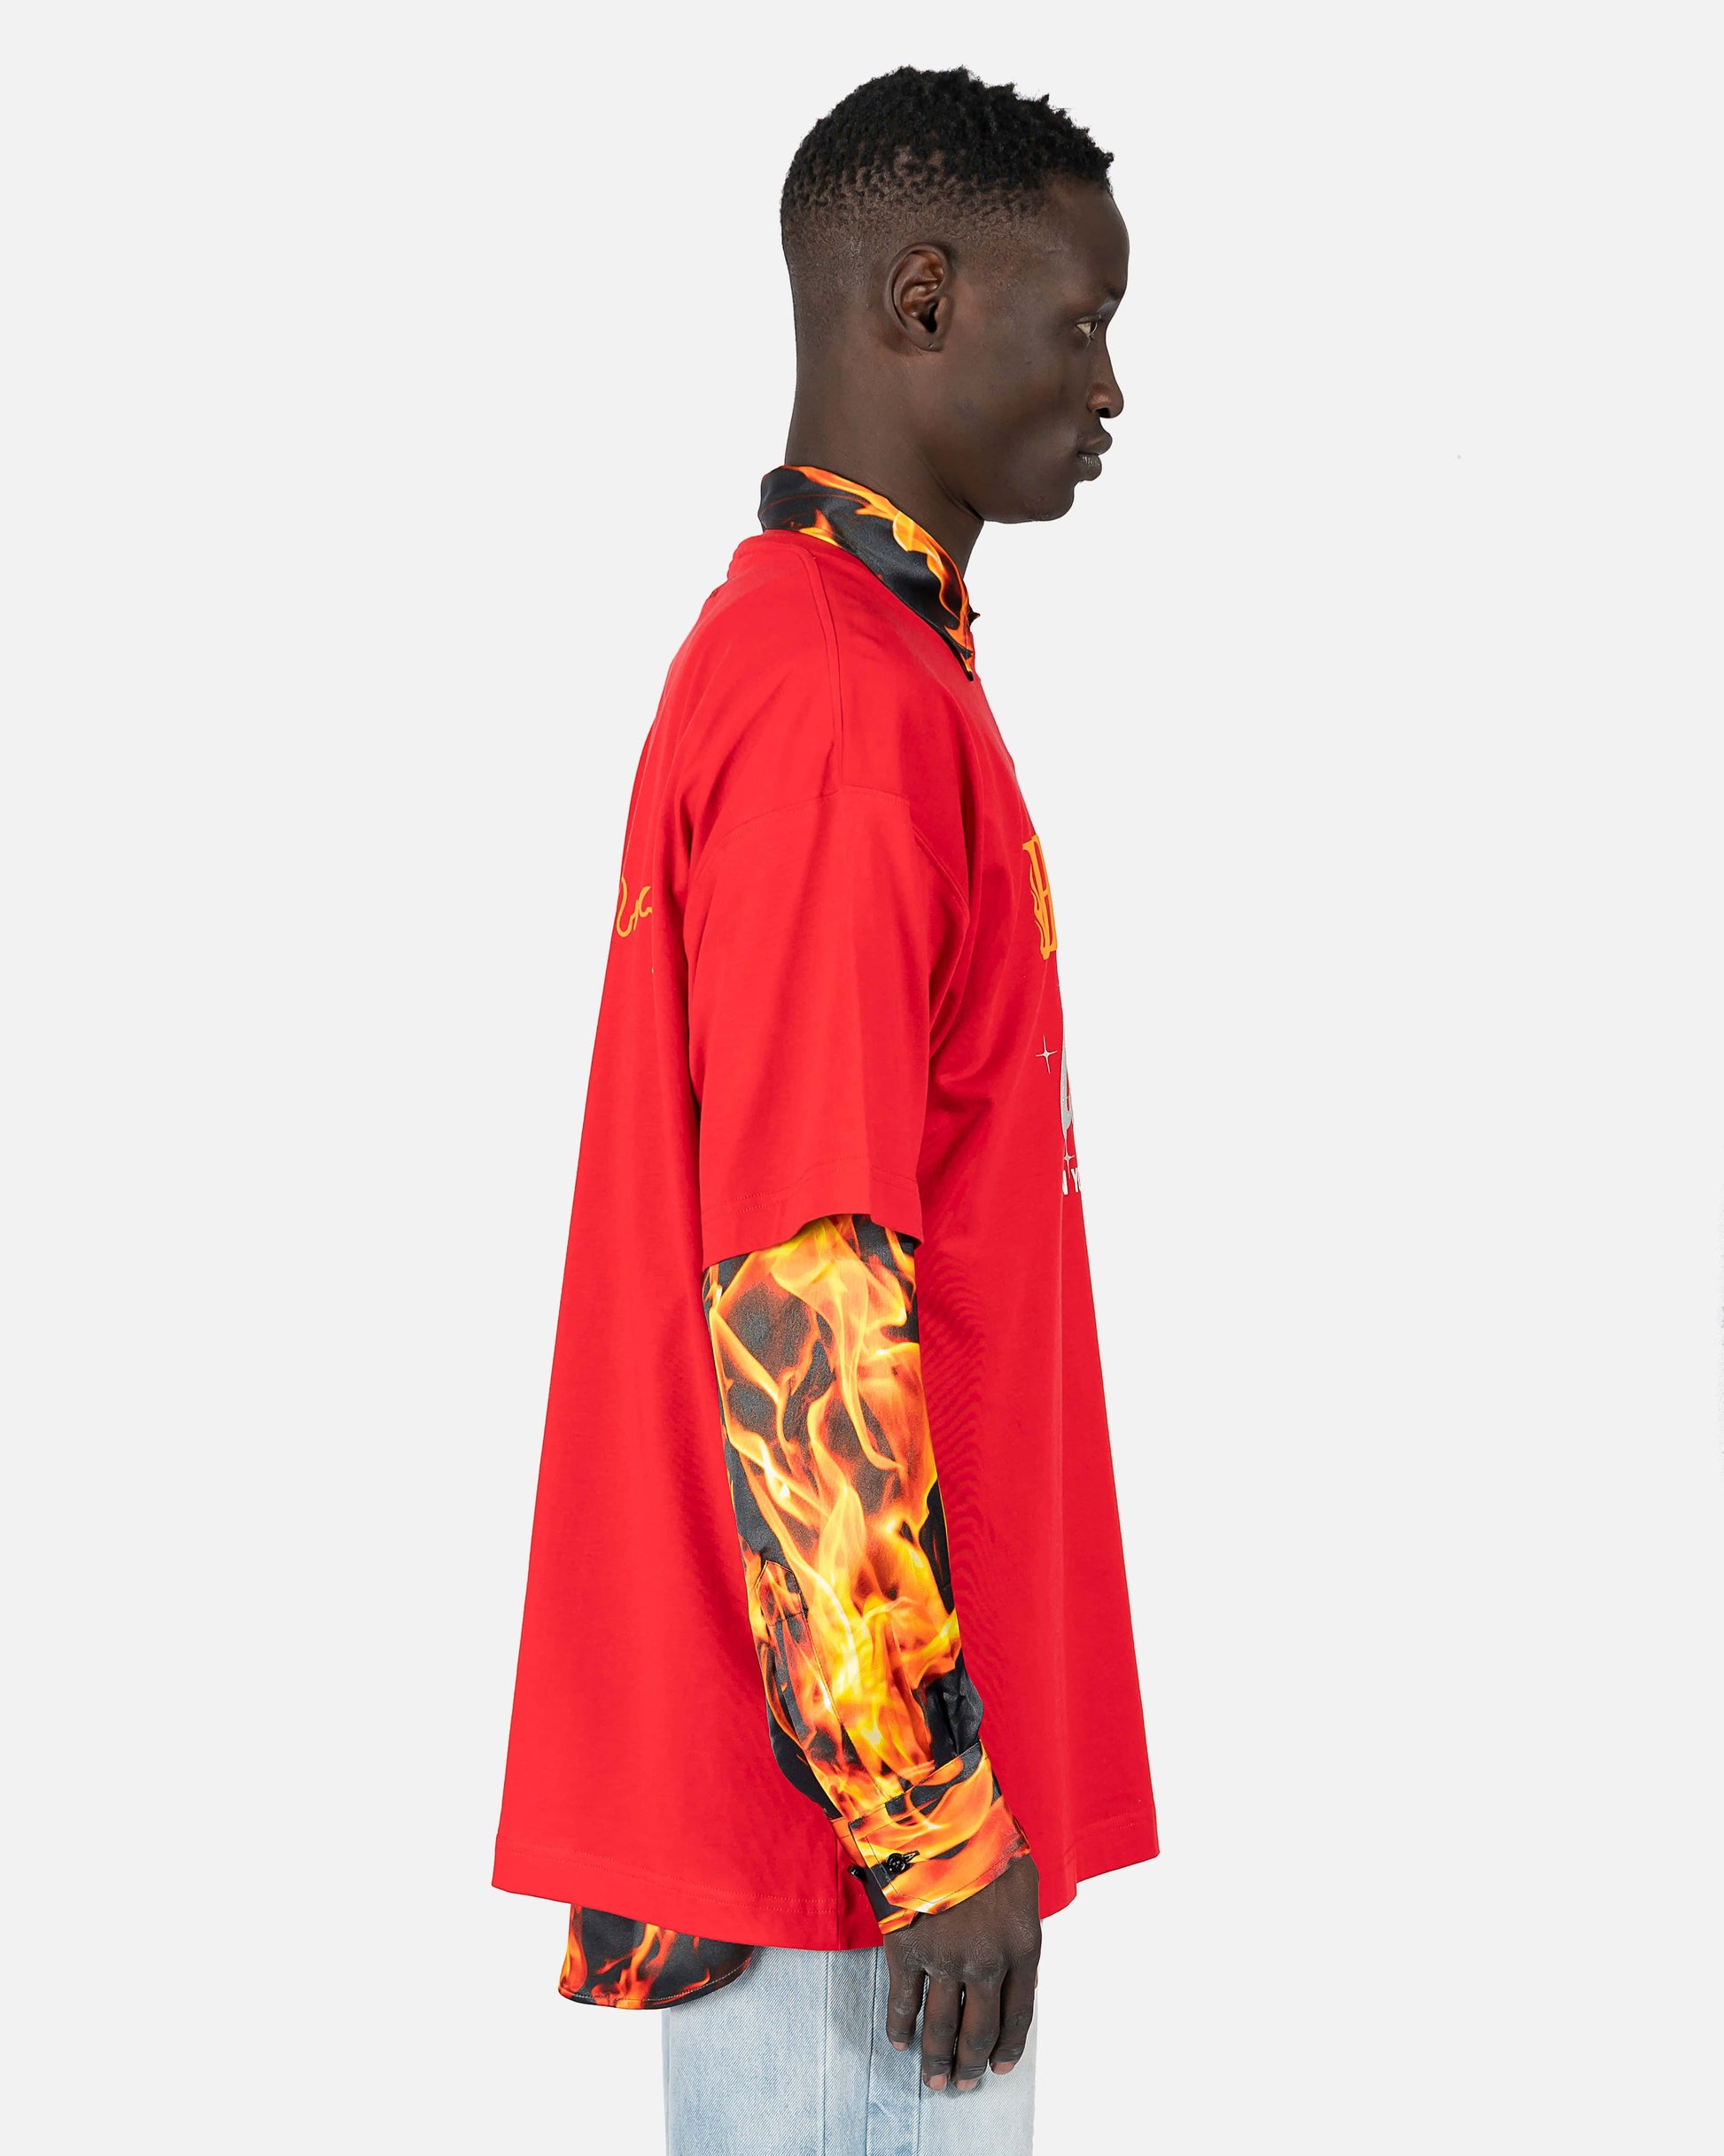 VETEMENTS Men's T-Shirts Hotter Than Your Ex T-Shirt in Red